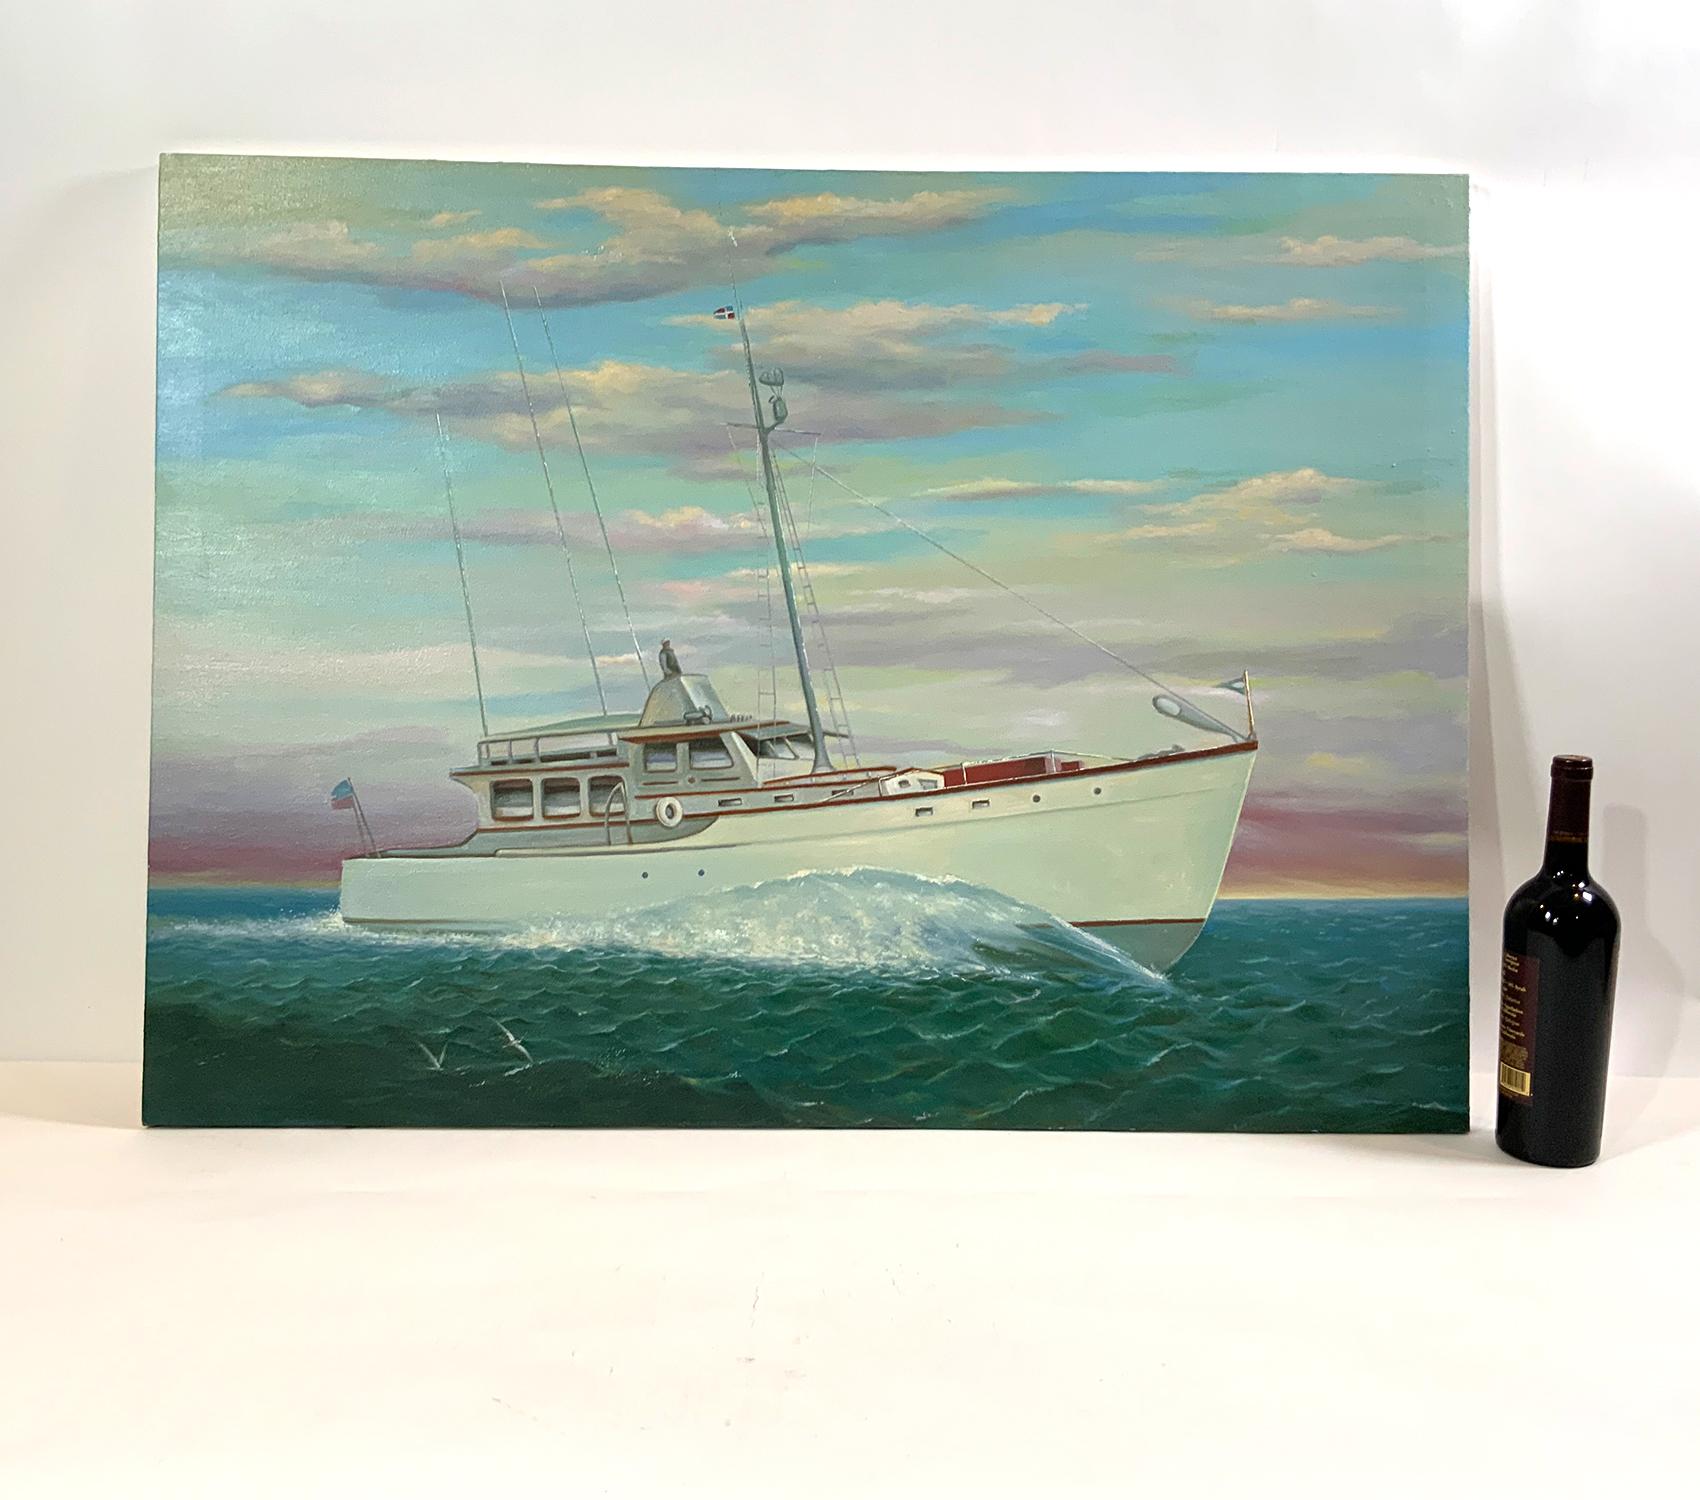 Large sport fishing yacht heading out to sea. The captain is atop the flying bridge. Vessel is fitted with outriggers. Burgees are flying. Oil on canvas with gallery wrap over wood frame. Signed lower right A. Santuango.

Weight: 6 LBS
Overall